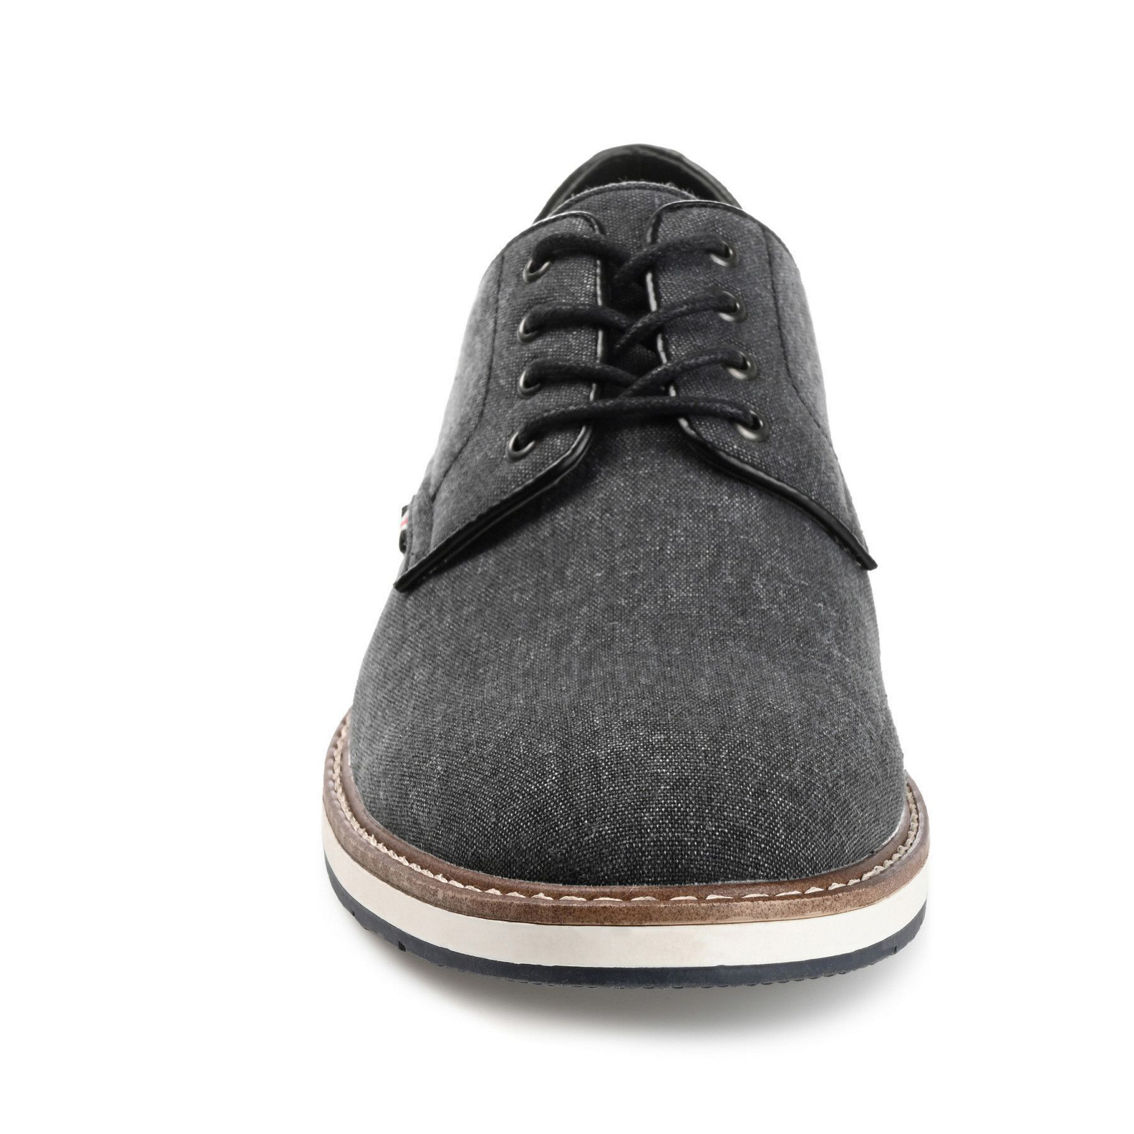 Vance Co. Ammon Textile Casual Dress Shoe - Image 2 of 4